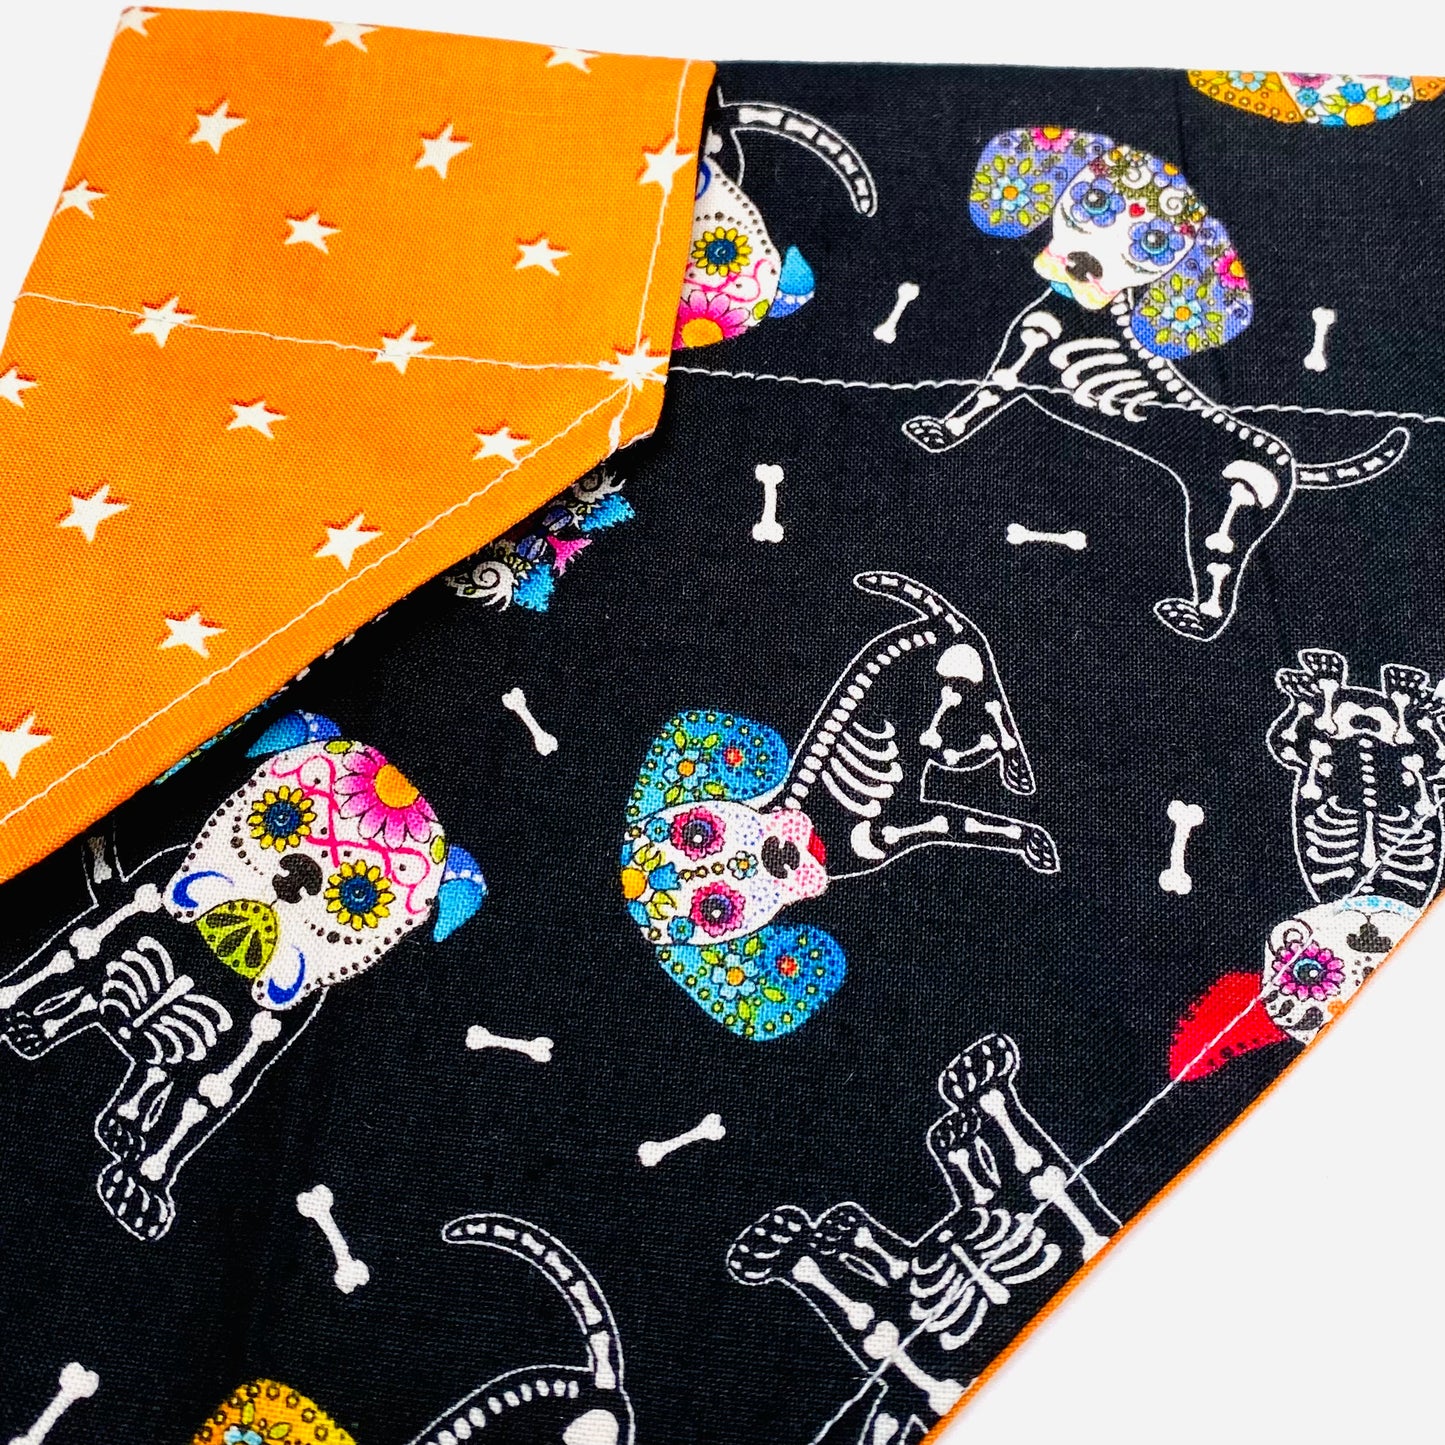 Glow in the dark dog bandana that slides over the collar.